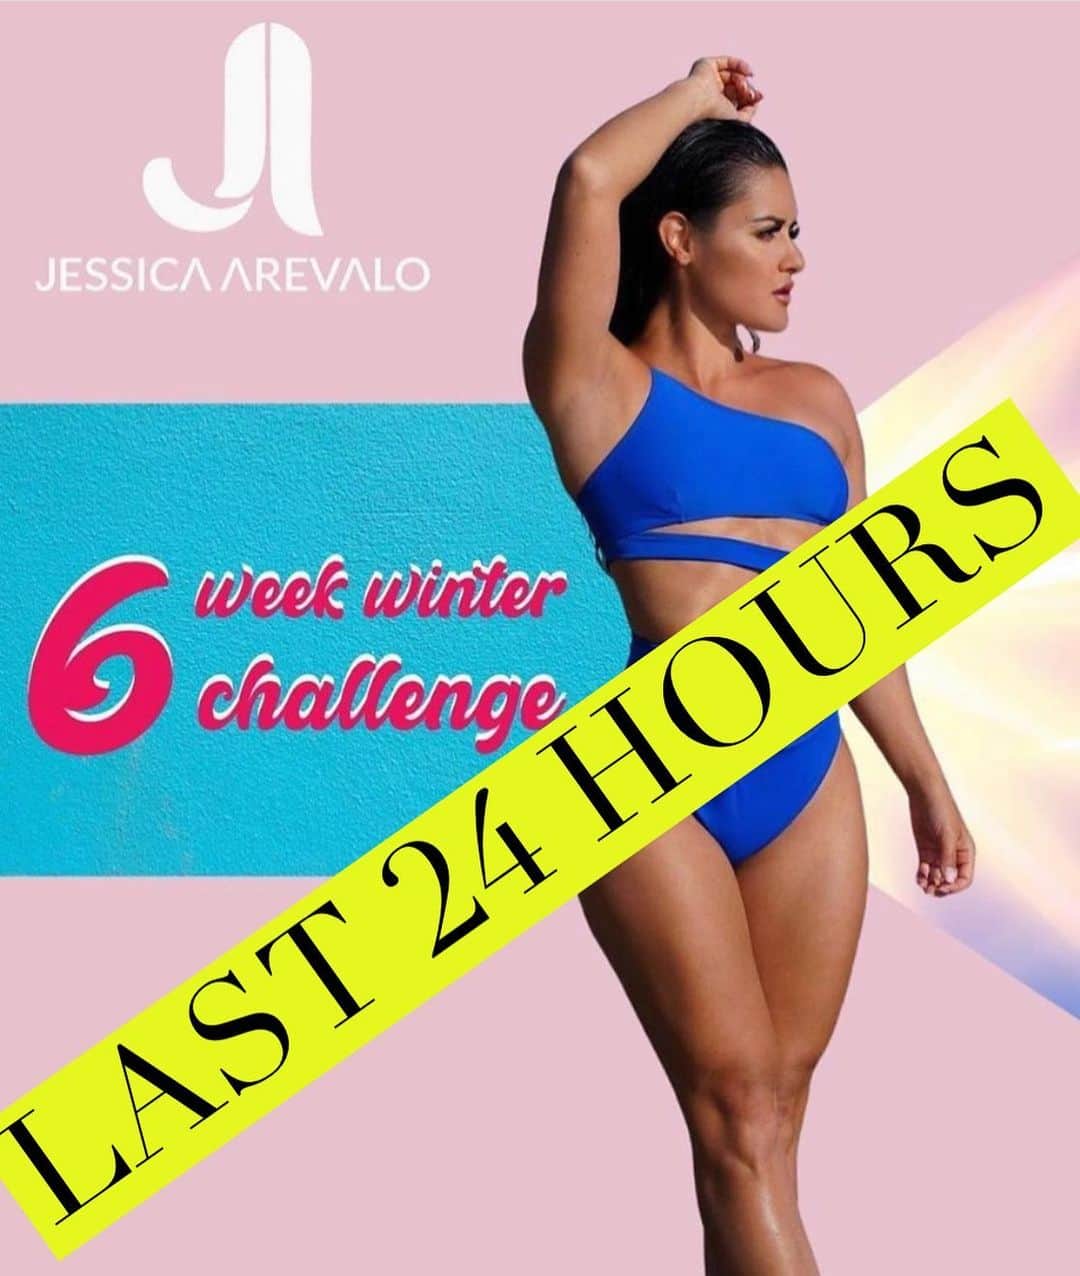 Jessica Arevaloのインスタグラム：「ONLY 24 HOURS LEFT TO SIGN UP! MY 6 WEEK WINTER CHALLENGE IS NOW LIVE!😍  💥IF YOU ARE LOOKING TO TONE UP, LOSE FAT OR LEARN MY WAYS THIS CHALLENGE IS FOR YOU!💥 - Open enrollment is through Dec 13 & the challenge starts Dec 14! DON’T WAIT!🙌🏼 - 🔺My 6 Week Winter is challenge is just $99!!!  🔺This program includes: - 🔺BOTH GYM/HOME WORKOUTS  - 🔺Over $6k in cash prizes - 🔺One on One Coaching with me - 🔺Weekly Check ins - 🔺Workout Program +Macros/Meal Plans + Cardio Regimen  - 🔺Private Facebook Group and more! - 🔺WORLDWIDE ENTRY  - 🔺 FOR WOMEN & MEN  - CHECK OUT LINK IN BIO TO SIGN UP!👆🏼If you have any question please feel free to DM me directly!📩」